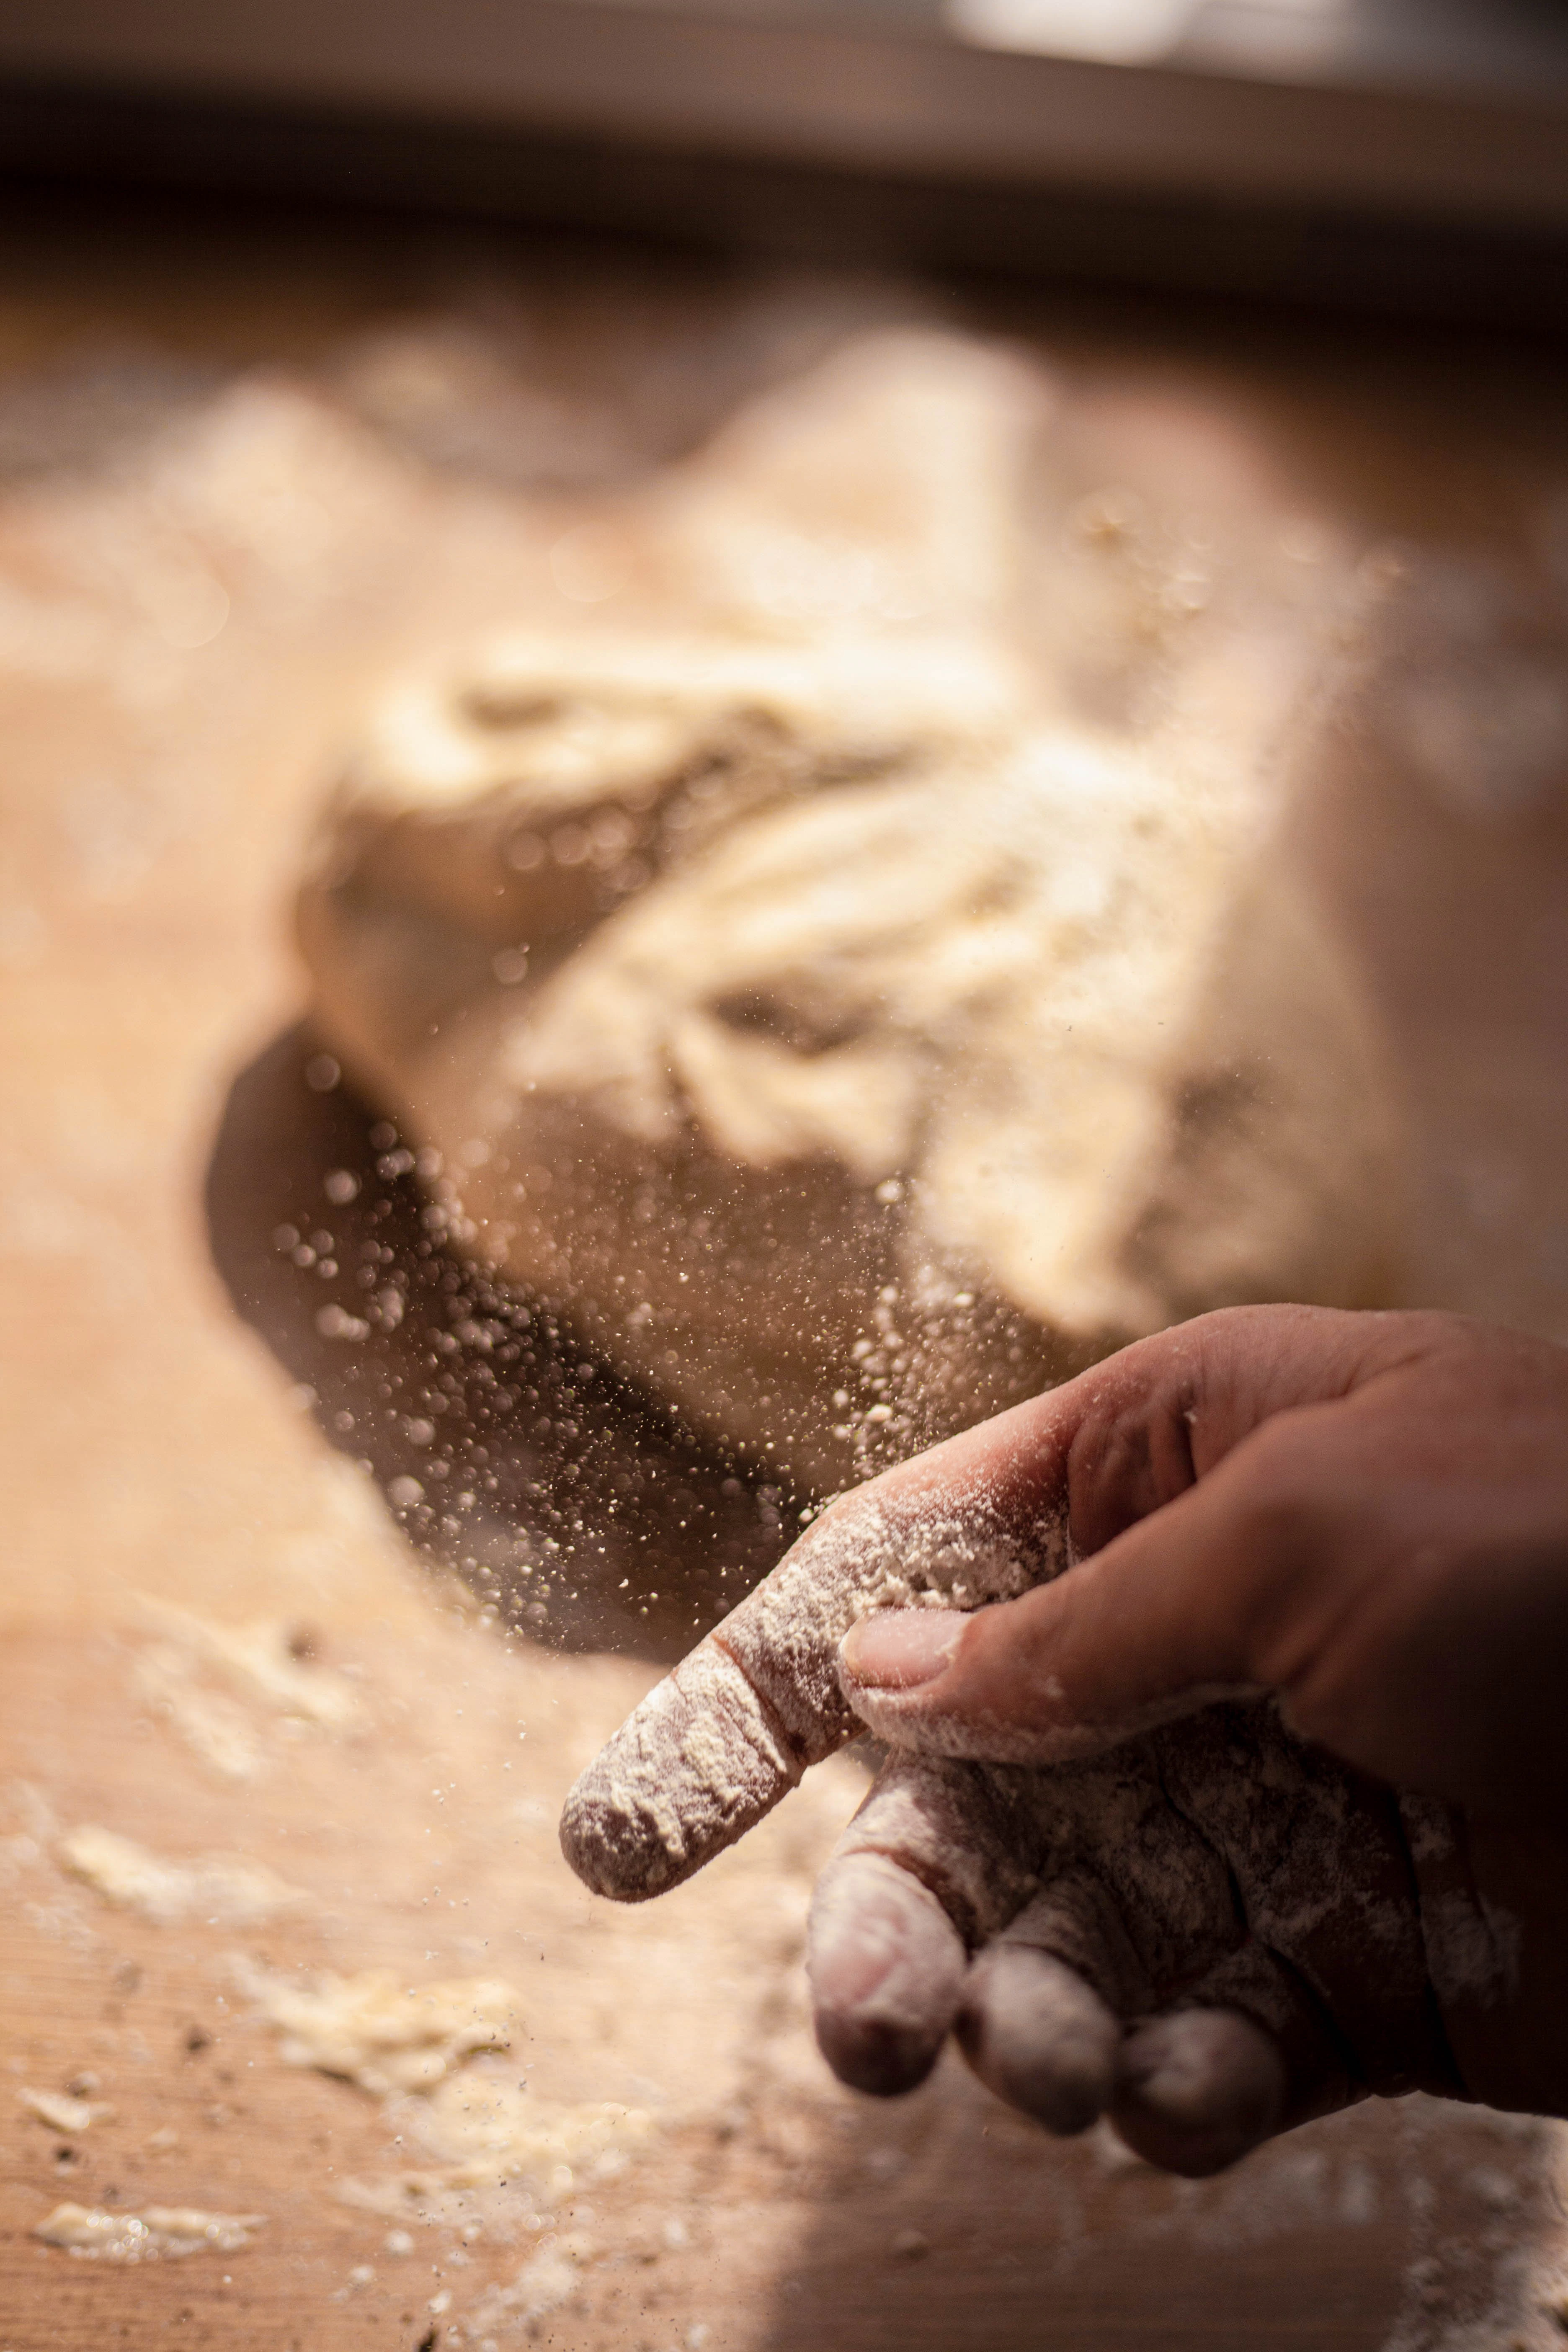 A hand with flour on is next to a ball of dough.